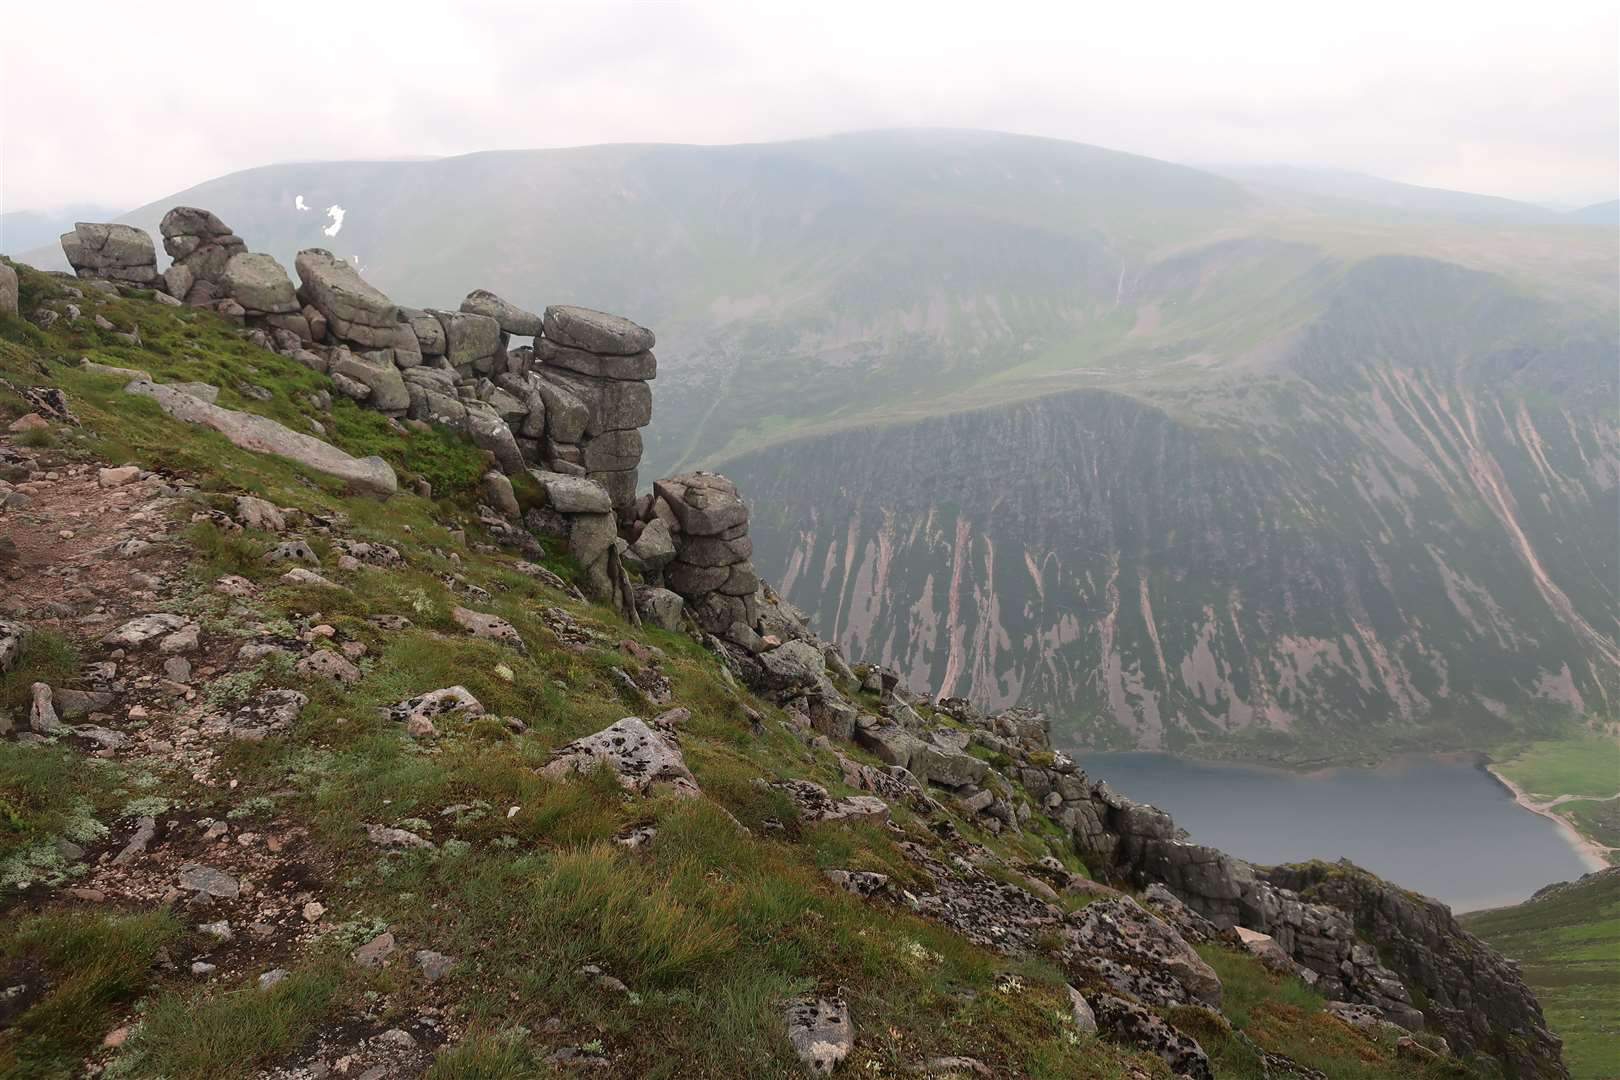 The rocky cliffs at the top of Sgor Gaoith, with the Braeriach plateau across the glen.